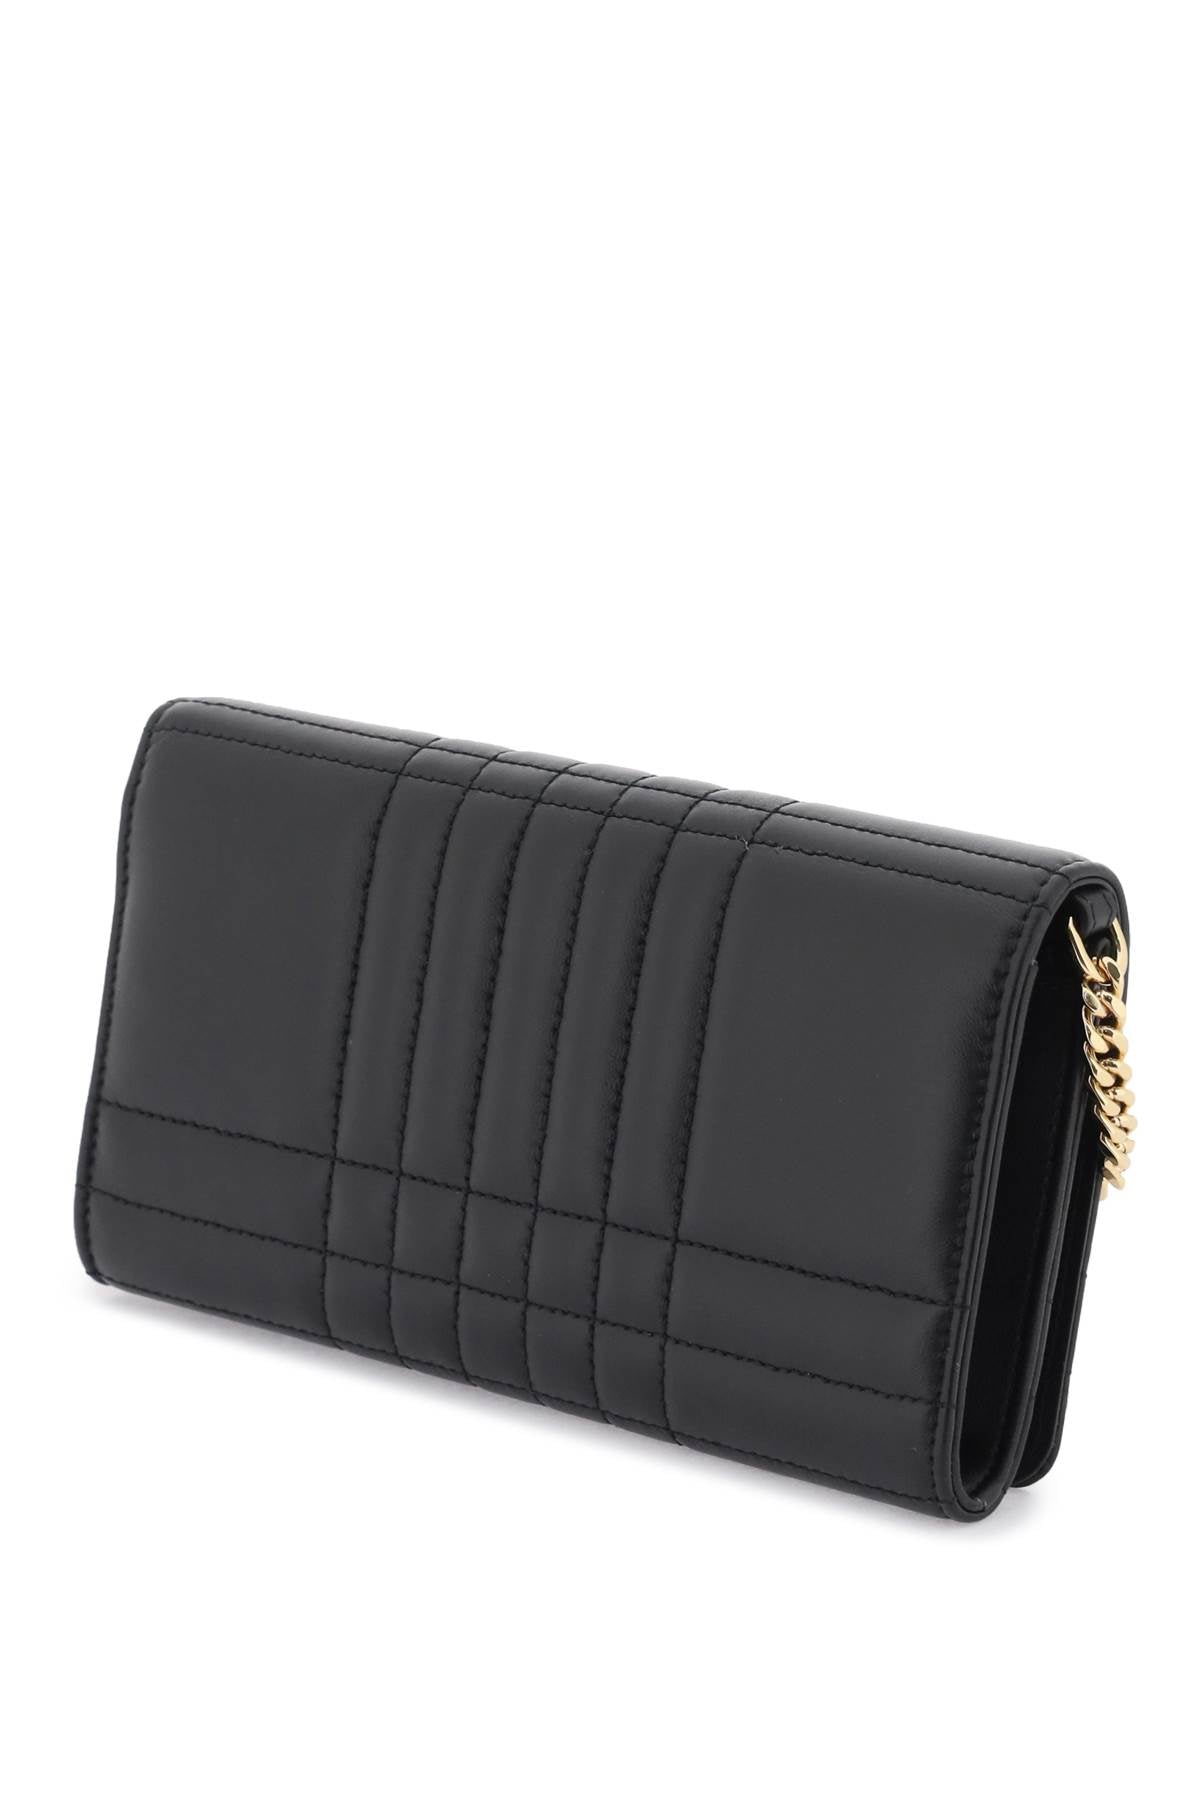 Burberry Quilted Leather Mini 'Lola' Bag Black